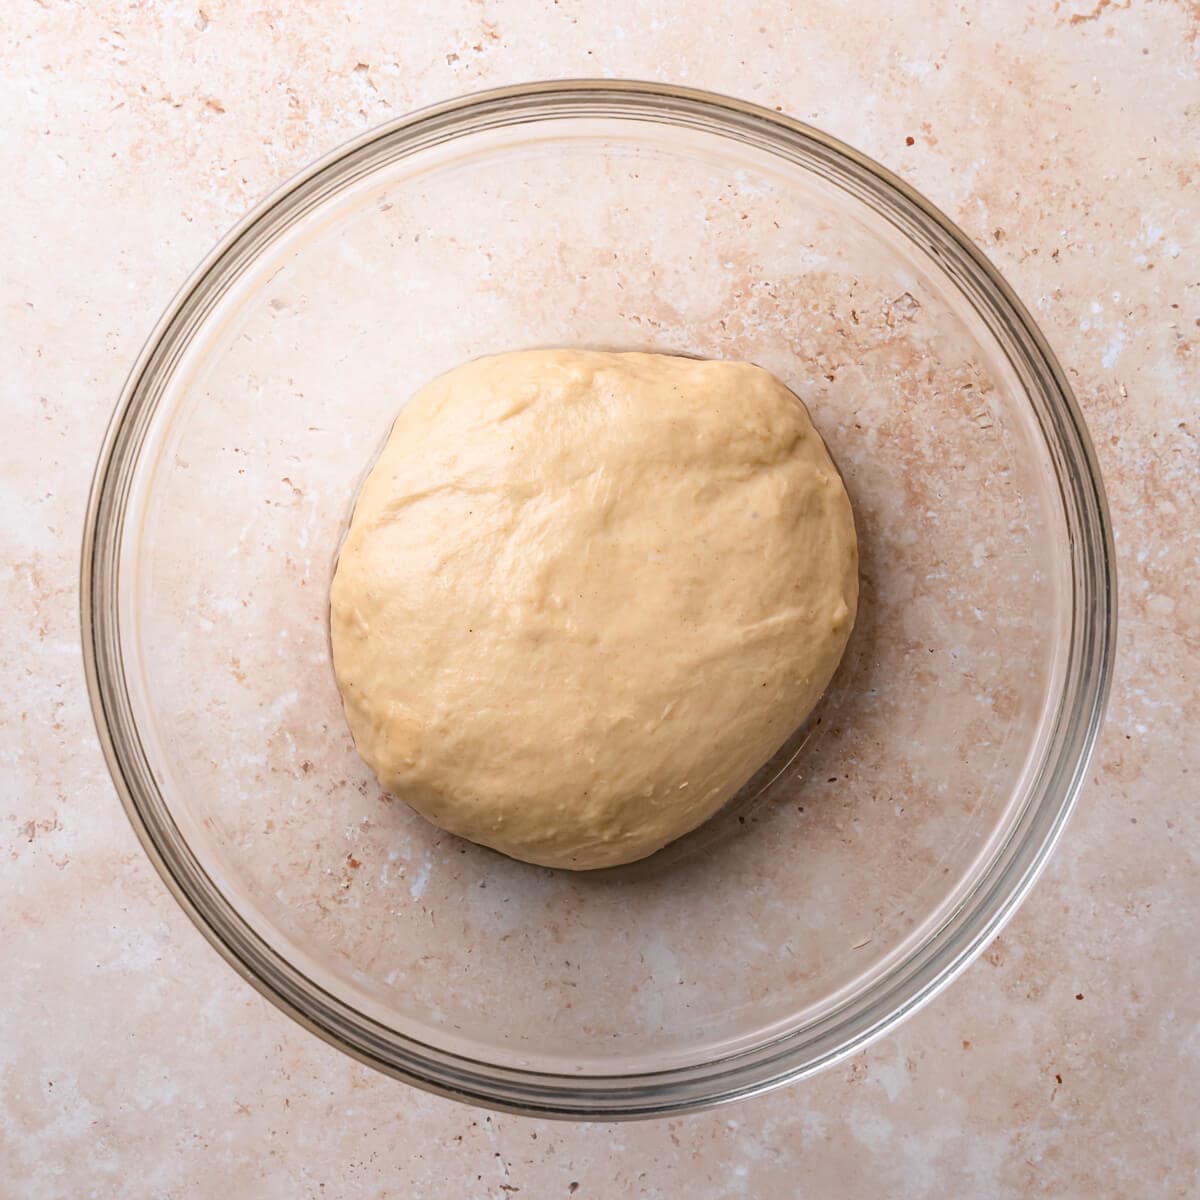 kneaded yeasted dough in a glass bowl.